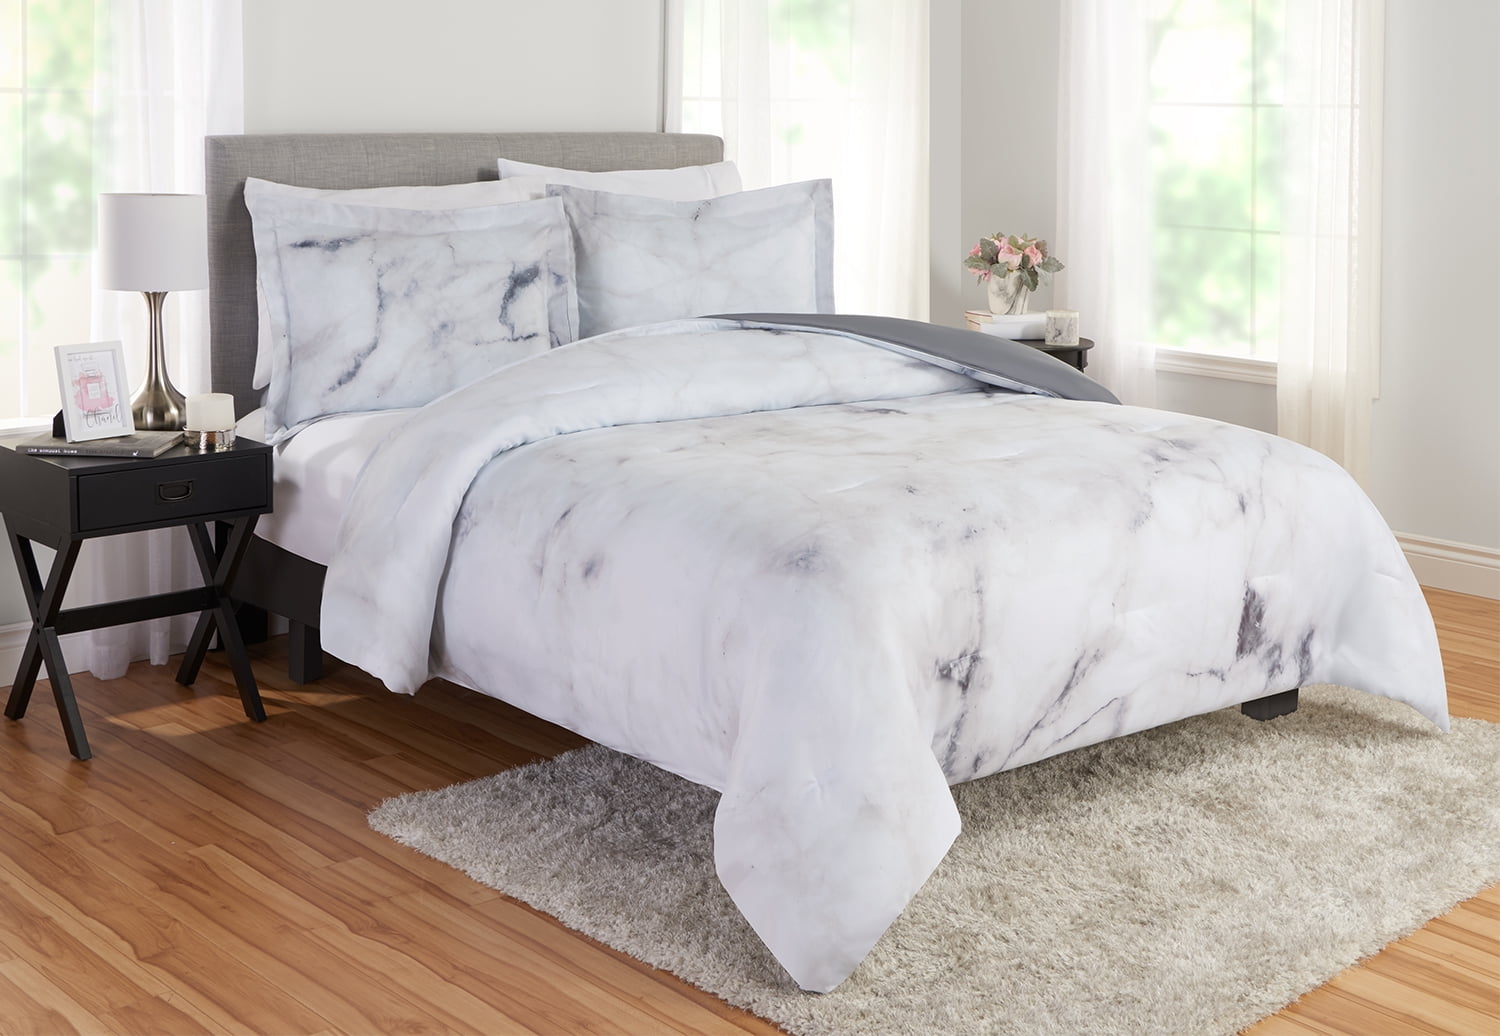 Details about   Bedsure Marble Printed Comforter Set Full/Queen, White Super S - 3-Piece Set 